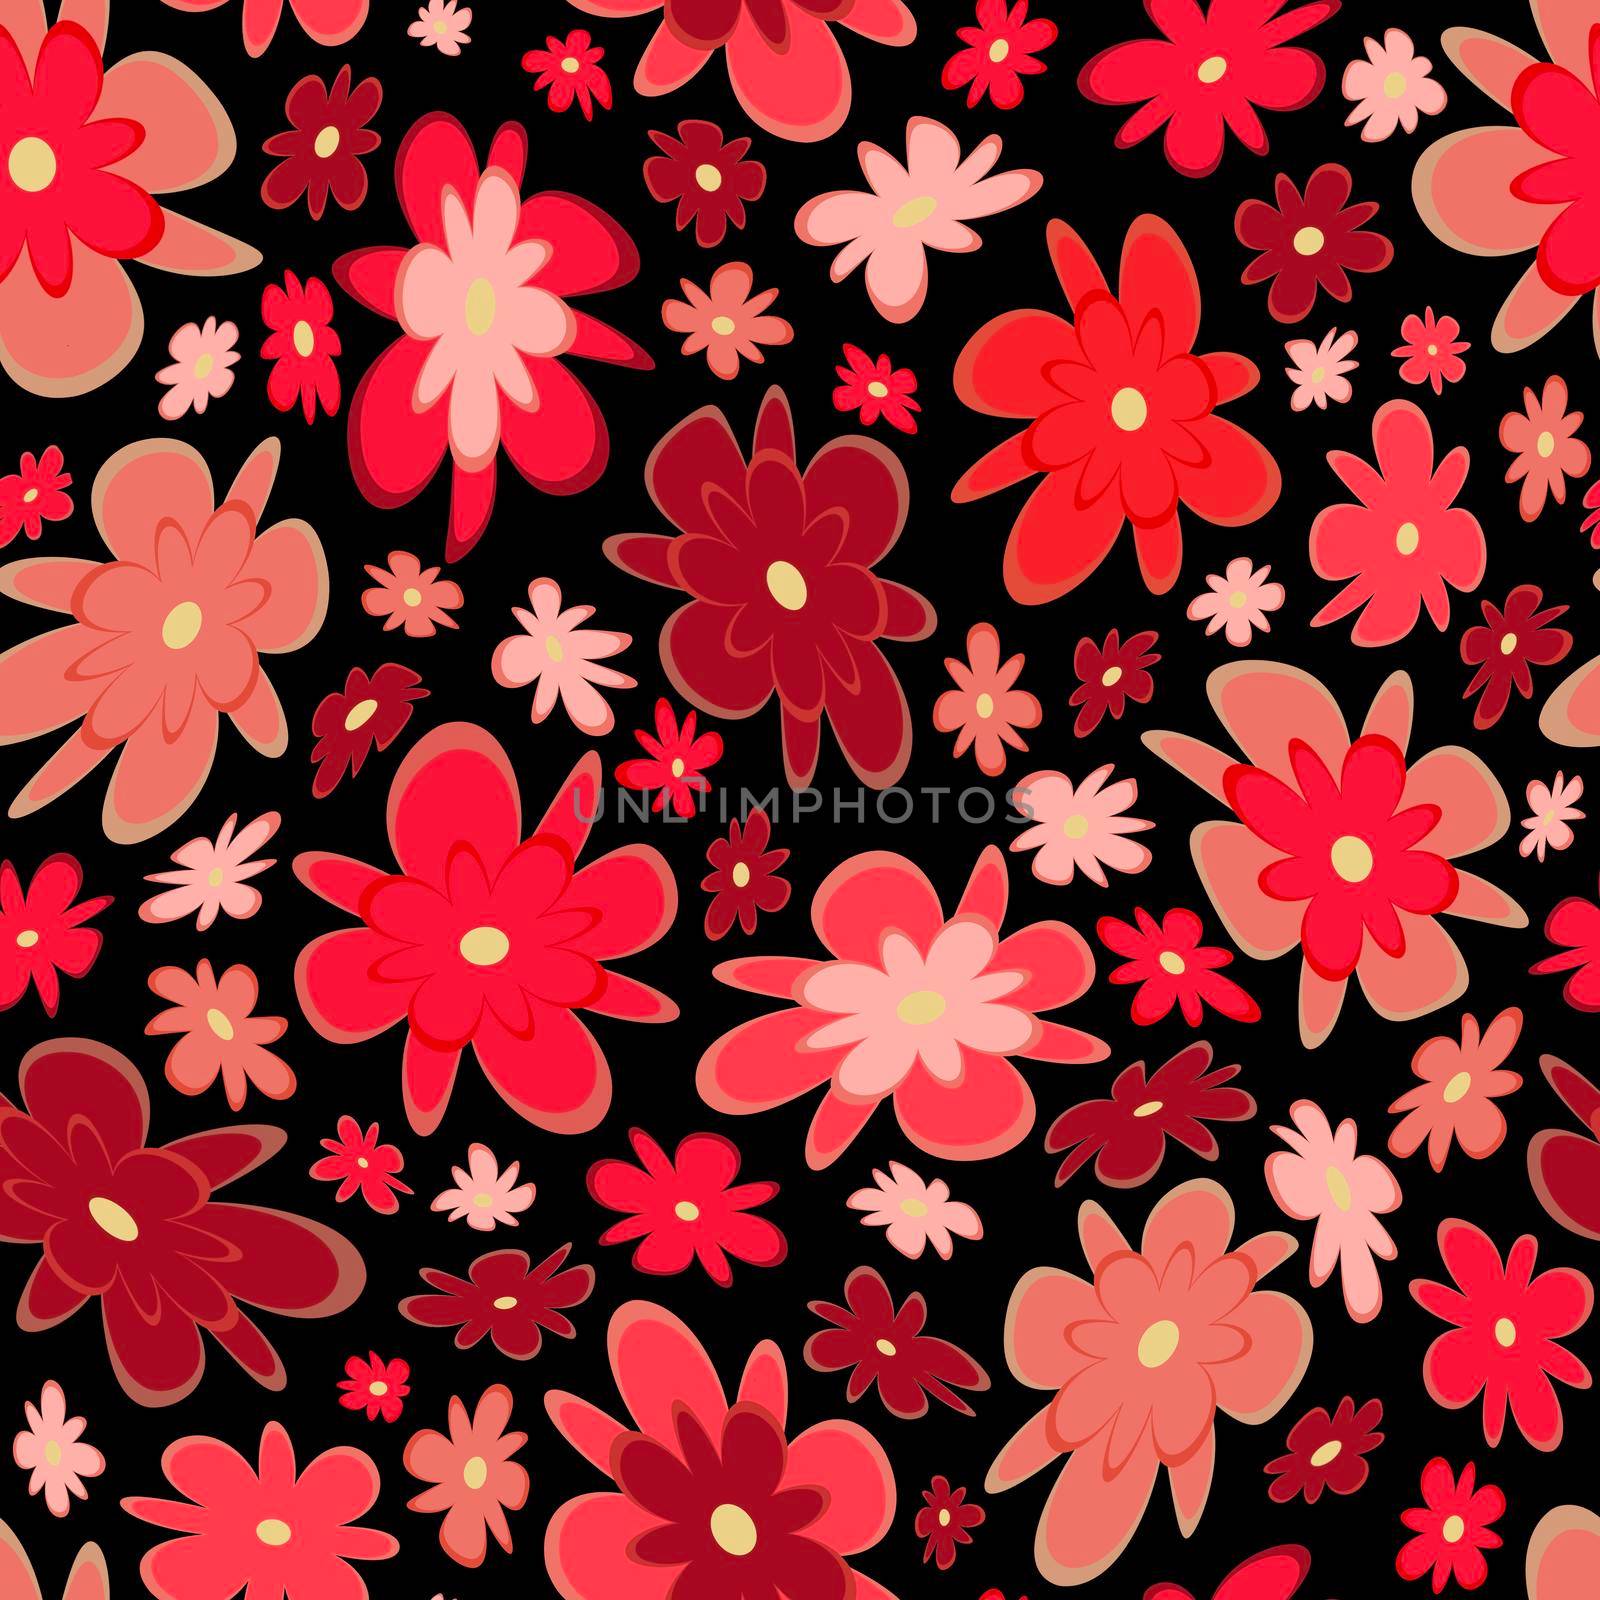 Trendy fabric pattern with miniature flowers.Summer print.Fashion design.Motifs scattered random.Elegant template for fashion prints.Good for fashion,textile,fabric,wrapping paper.Terracotta on black.